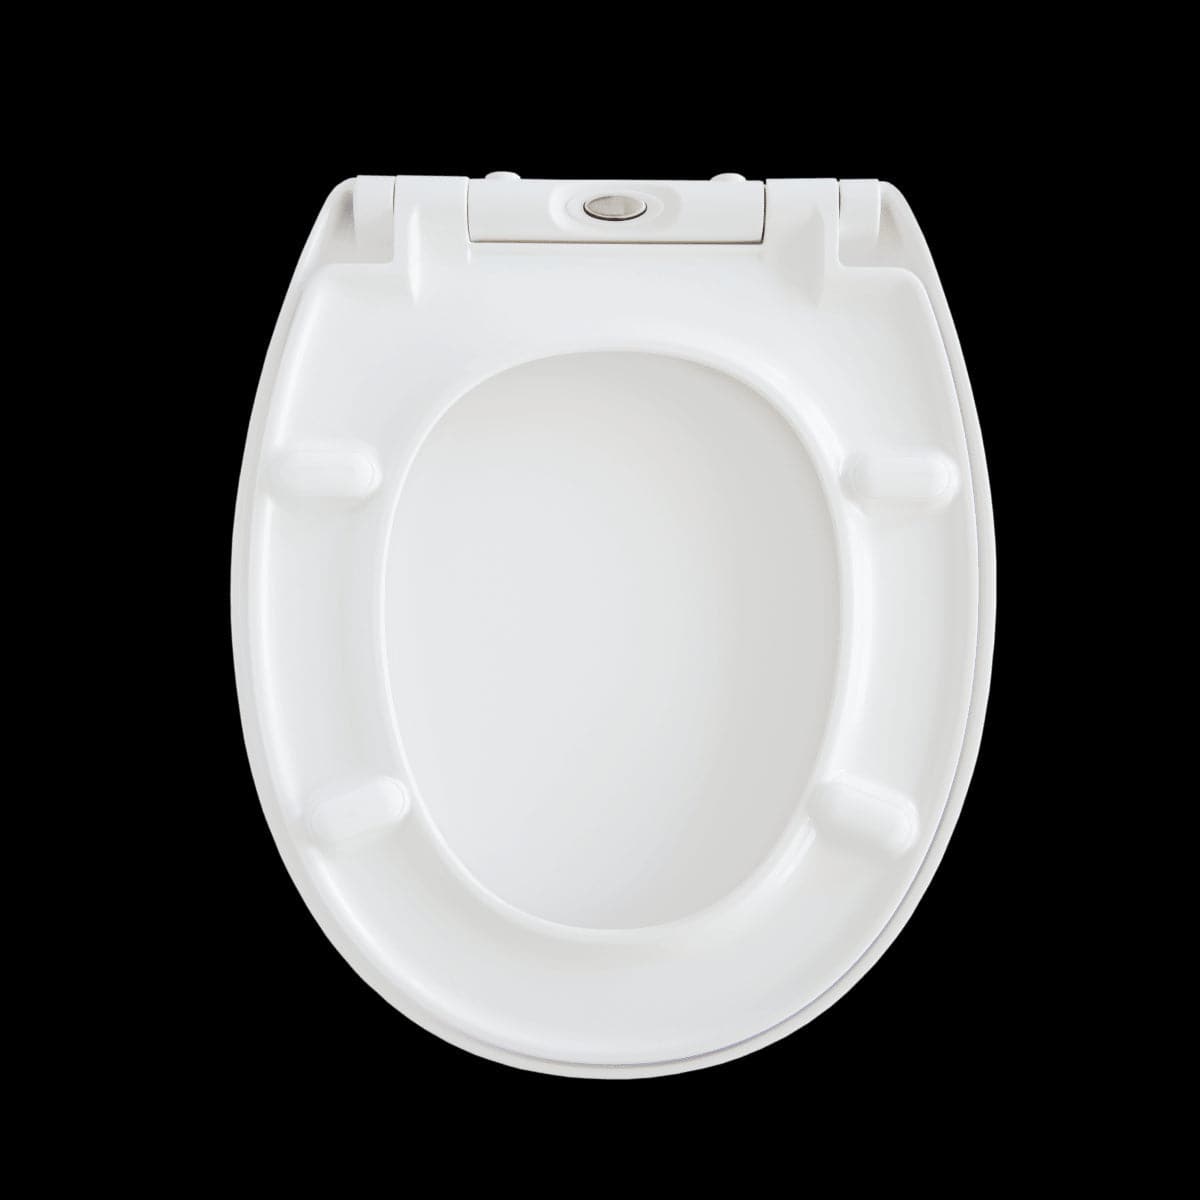 WC SEAT REMIX OVAL WHITE - METAL HINGES - SLOW CLOSING - TOP FIX - best price from Maltashopper.com BR430007080